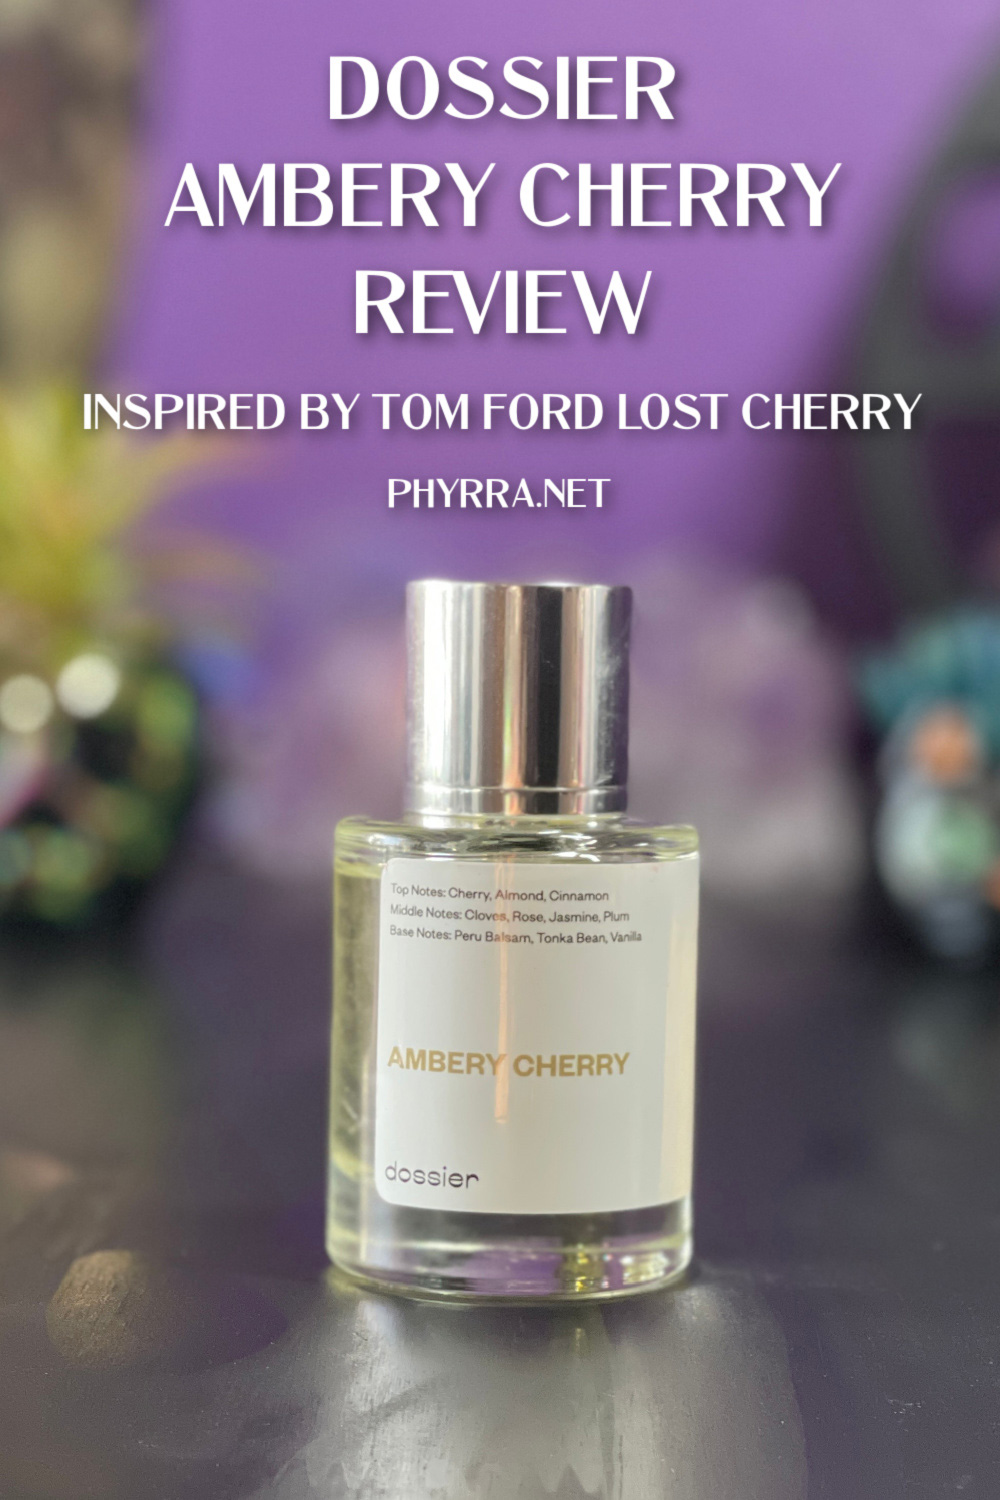 Dossier Ambery Cherry Review Inspired by Tom Ford Lost Cherry